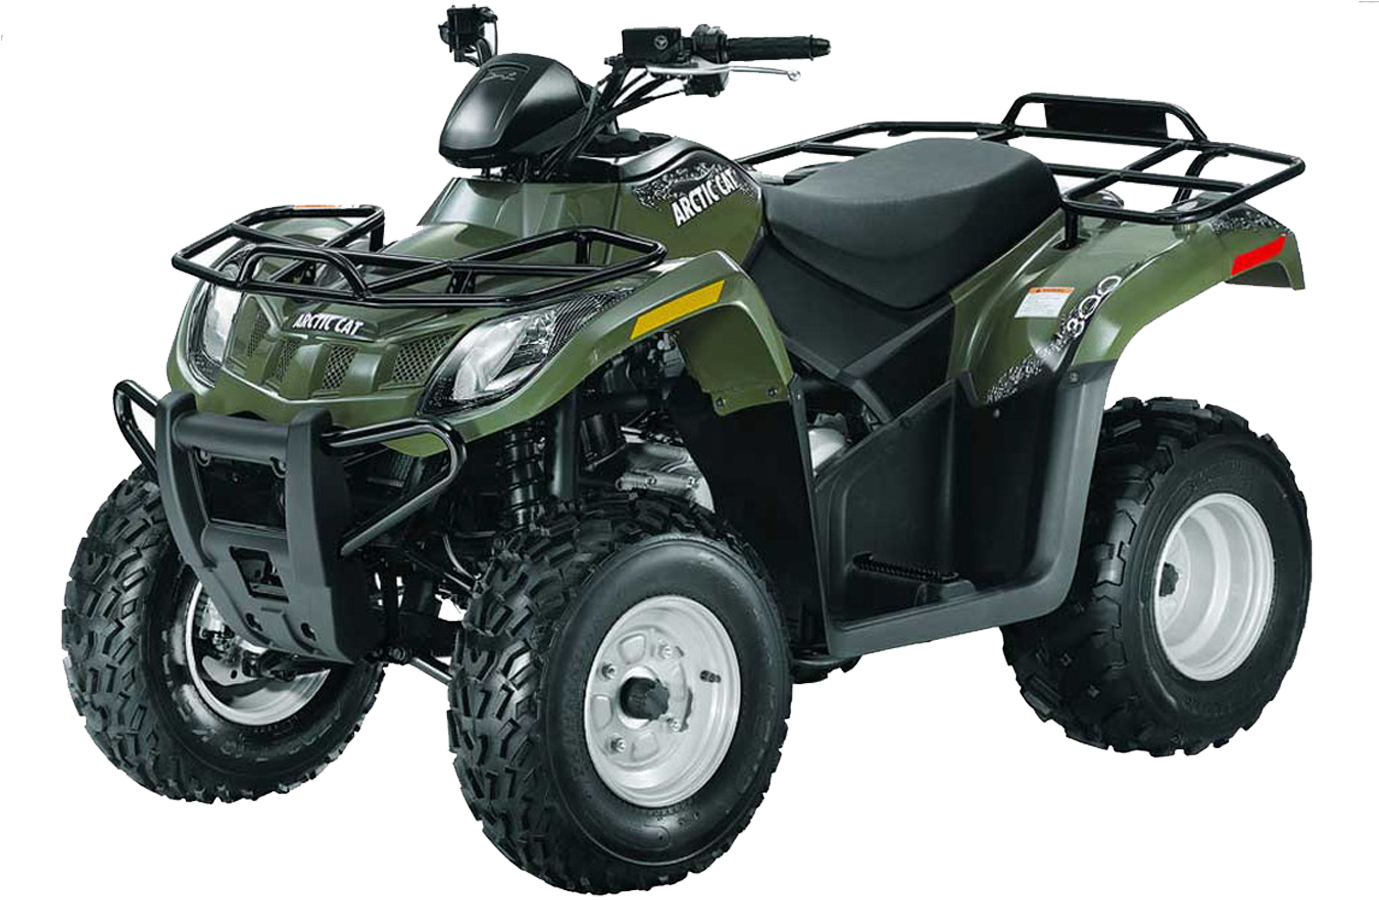 A Green Atv With Black Wheels